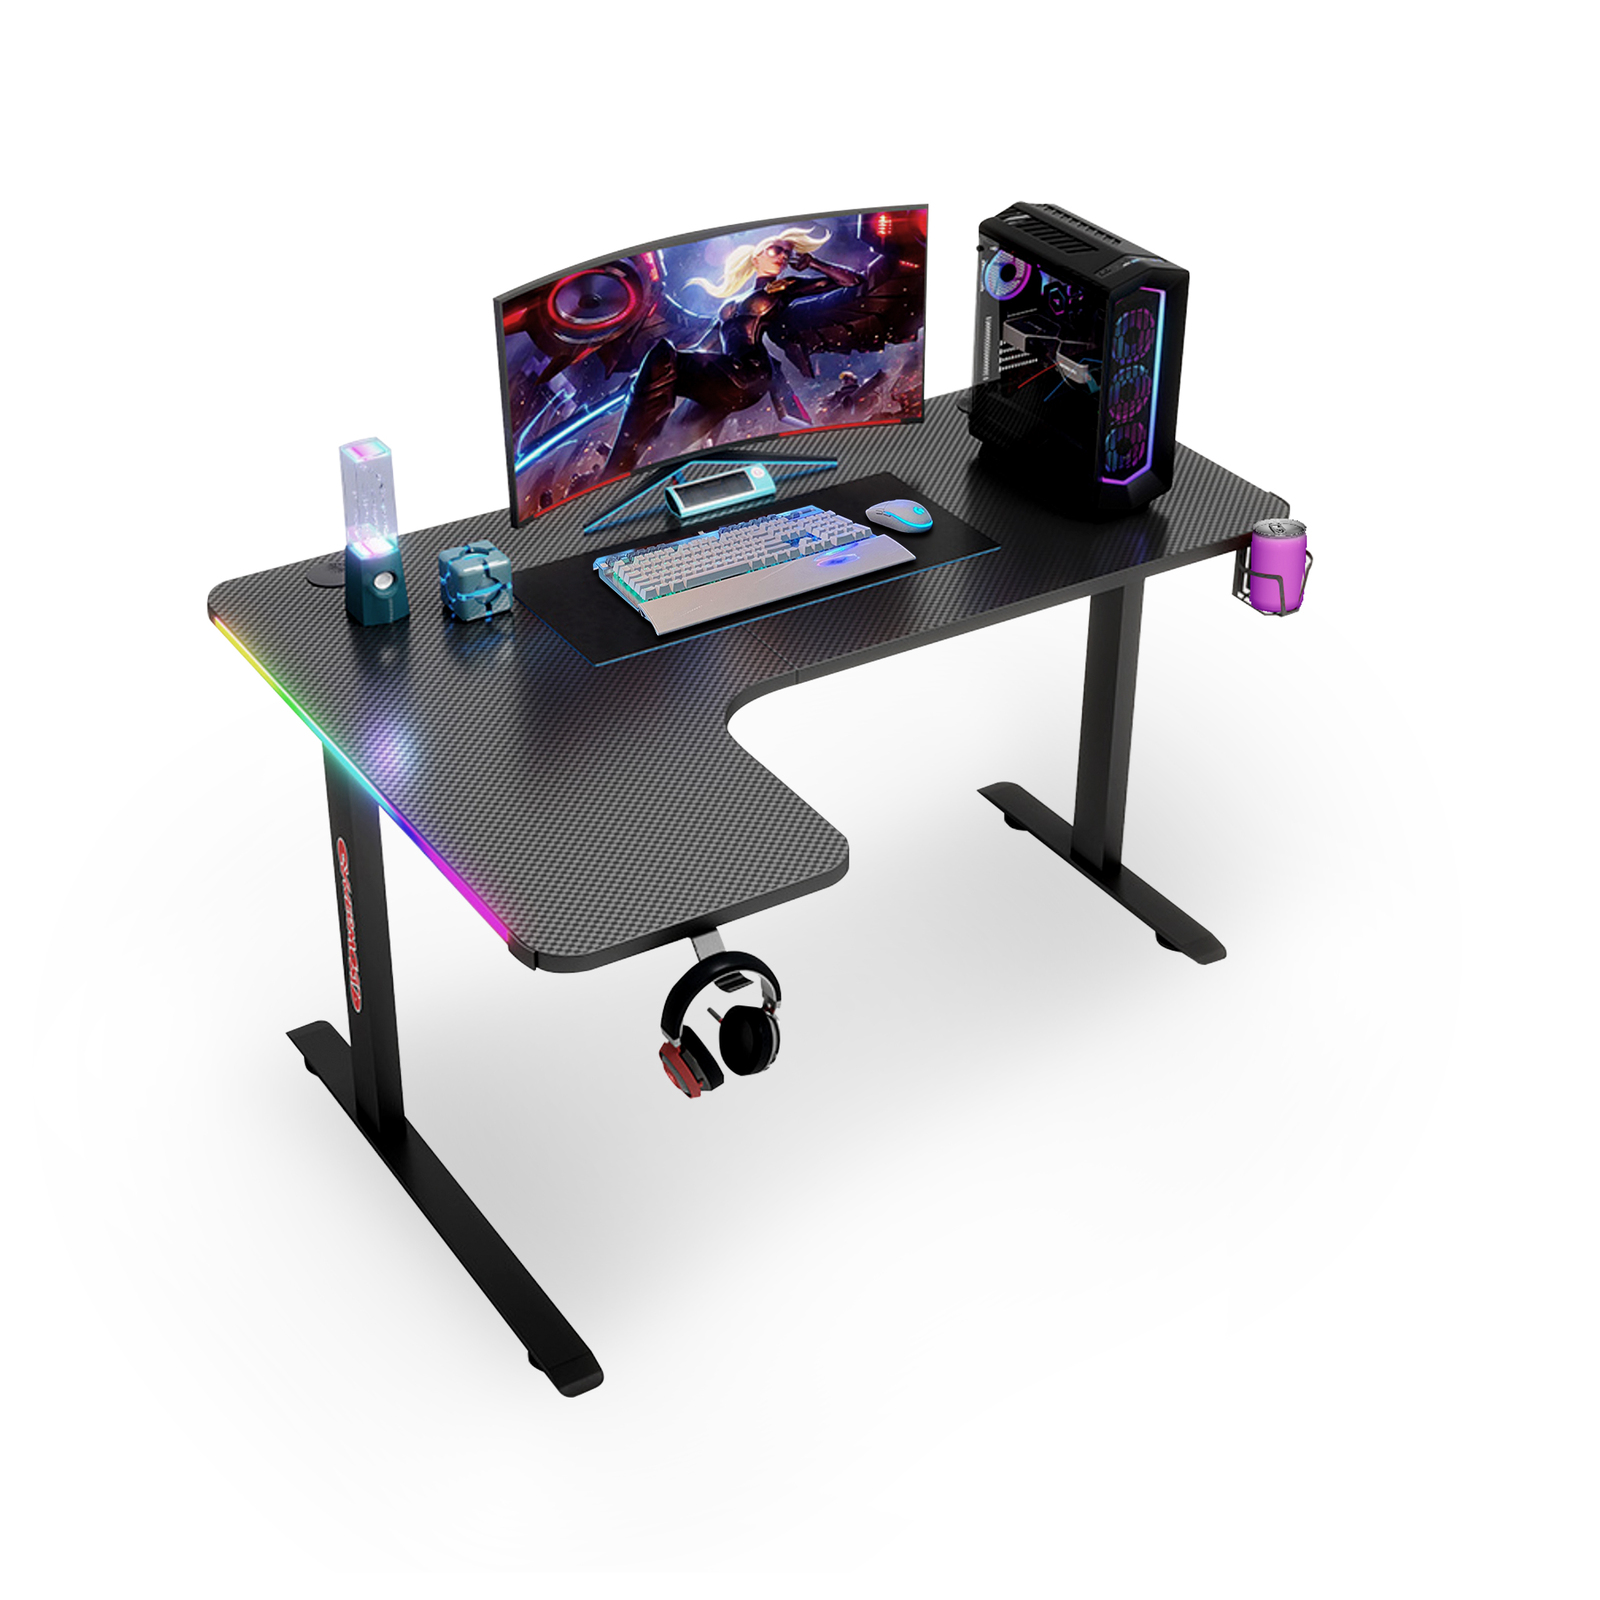 140cm Black RGB LED Gaming Desk Computer Home Office Writing Desk Racer Table Carbon Fiber Table With Cup Holder and Headphone Hook